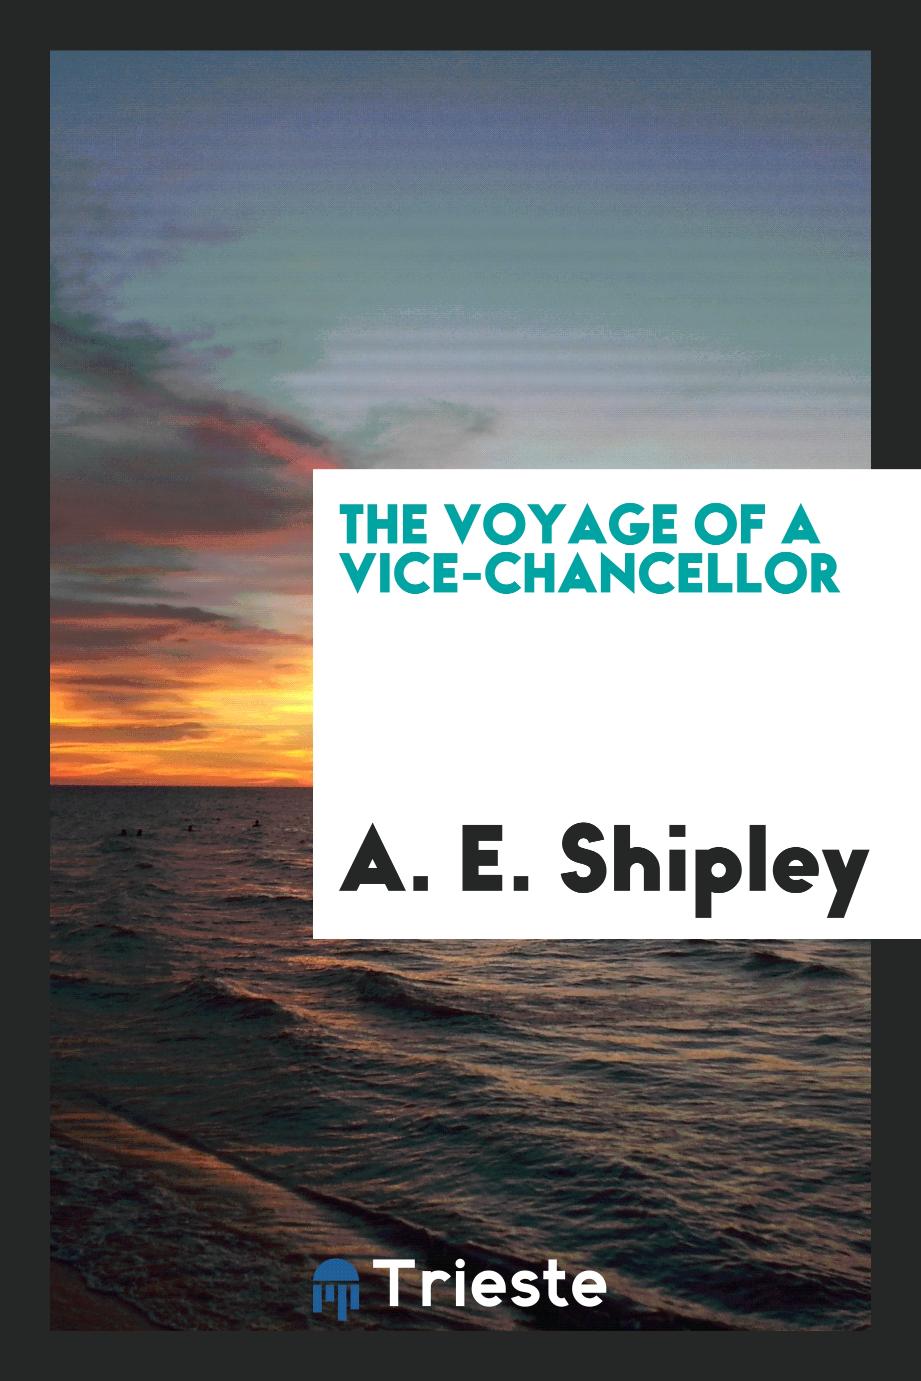 The voyage of a Vice-Chancellor